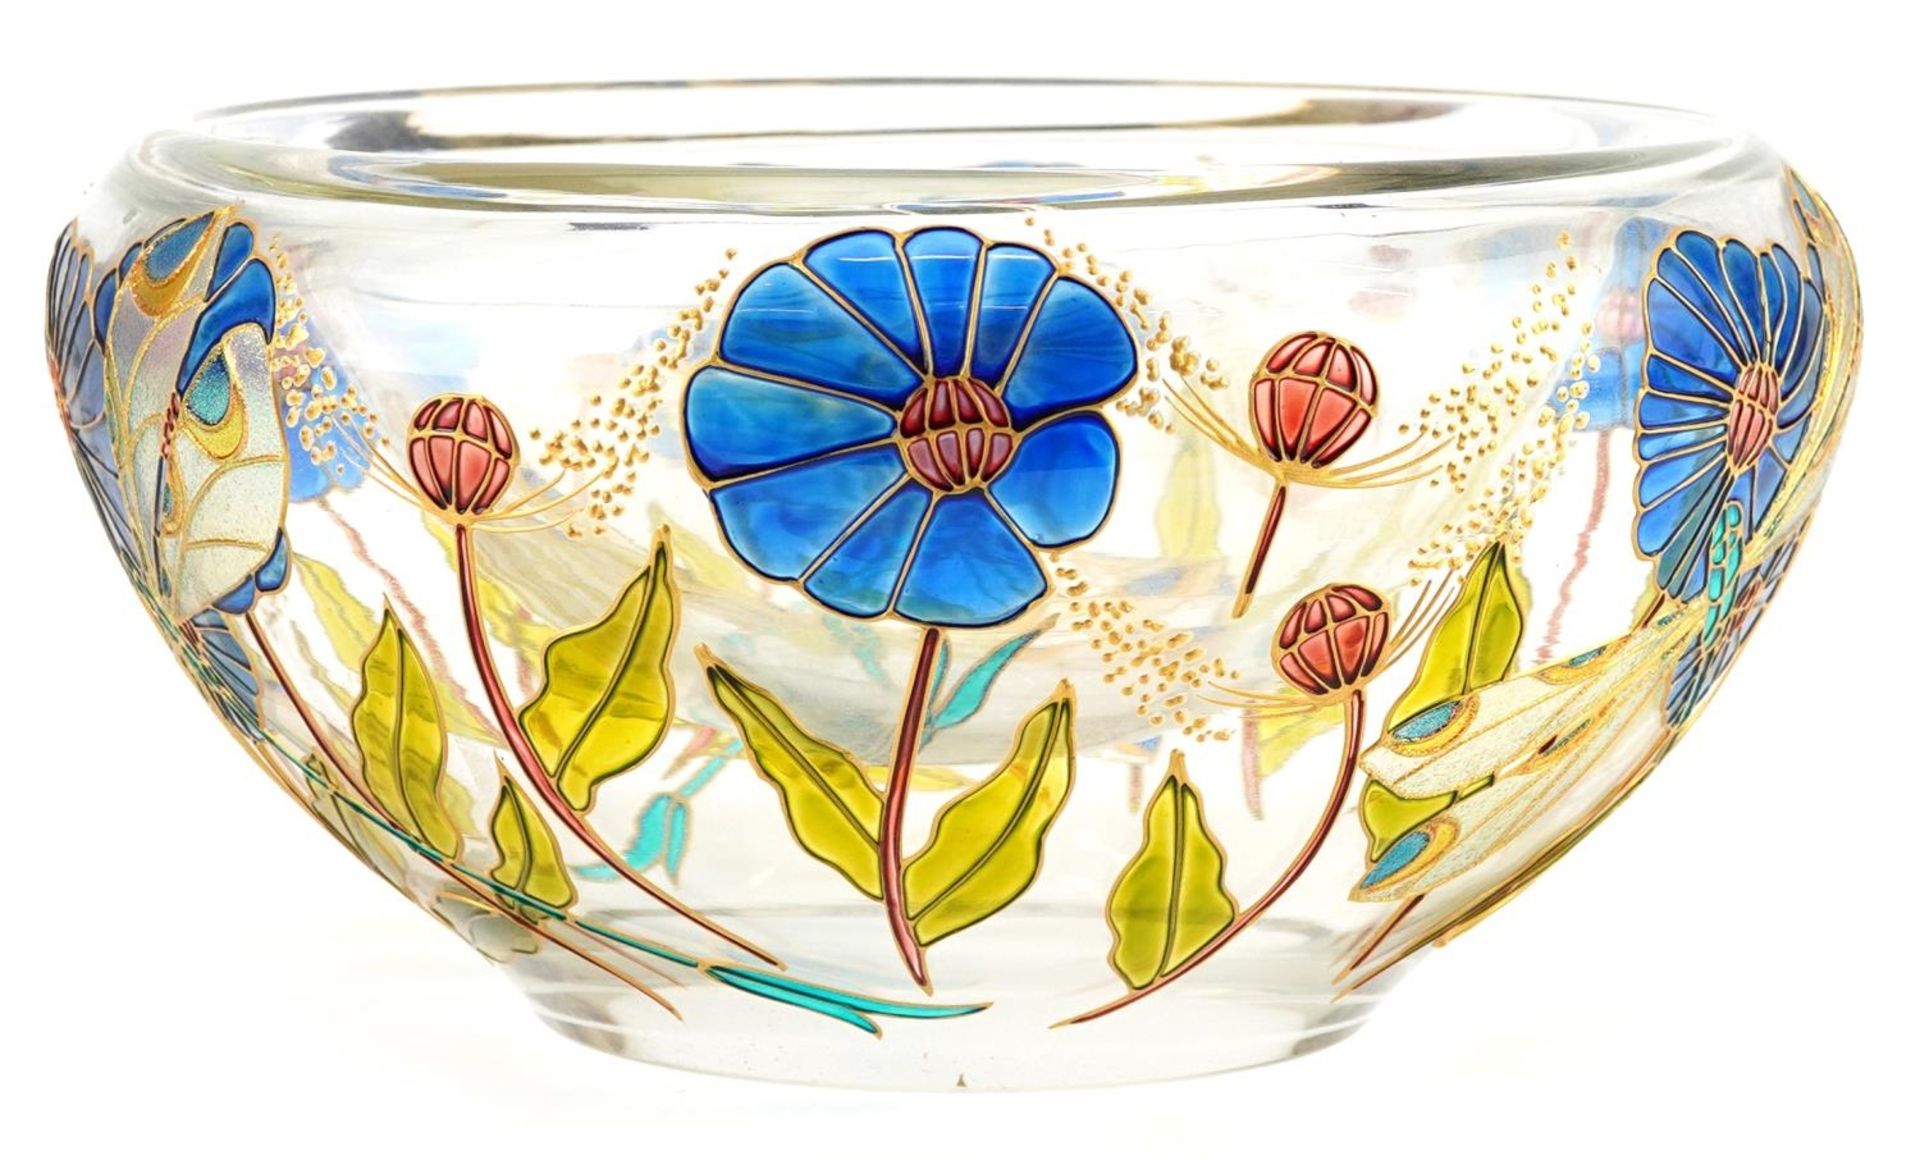 Double walled art glass bowl hand painted with dragonflies amongst flowers, 25.5cm in diameter - Bild 2 aus 5